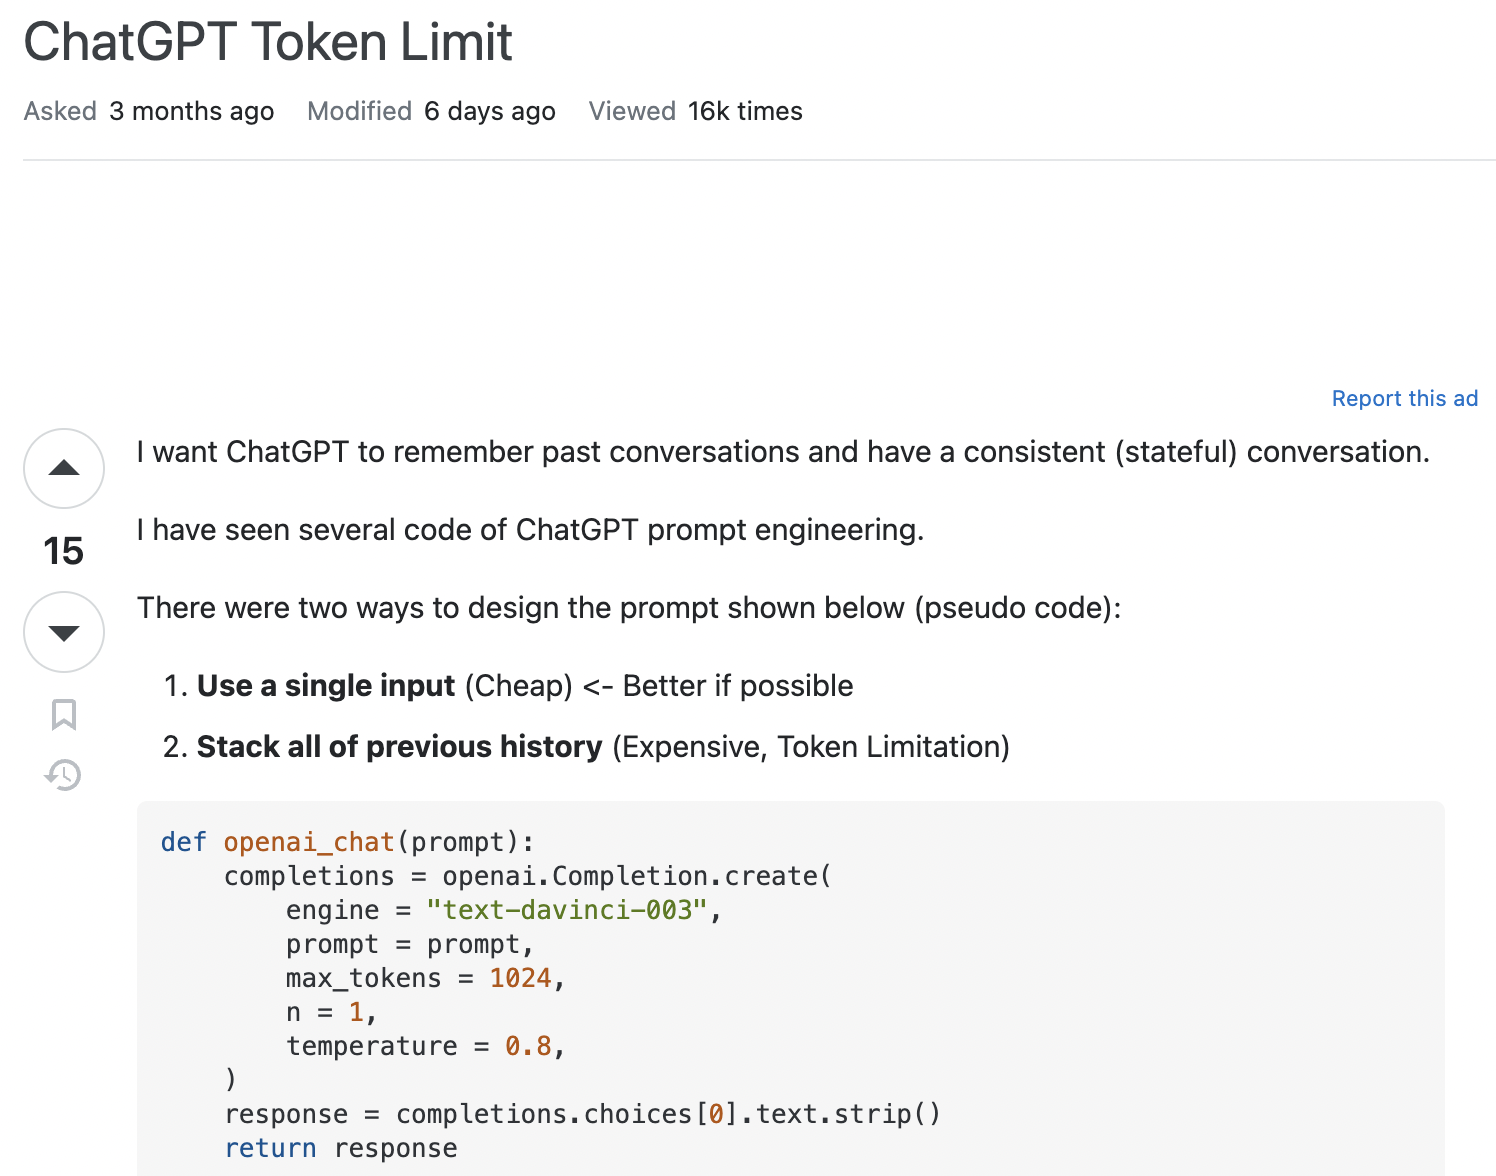 Screenshot of StackOverflow question titled ChatGPT Token Limit with content: I want ChatGPT to remember past conversations and have a consistent (stateful) conversation. I have seen several code of ChatGPT prompt engineering. There were two ways to design the prompt shown below (pseudo code): Use a single input (Cheap) <- Better if possible Stack all of previous history (Expensive, Token Limitation)… and additional pseudocode cropped from the screenshot